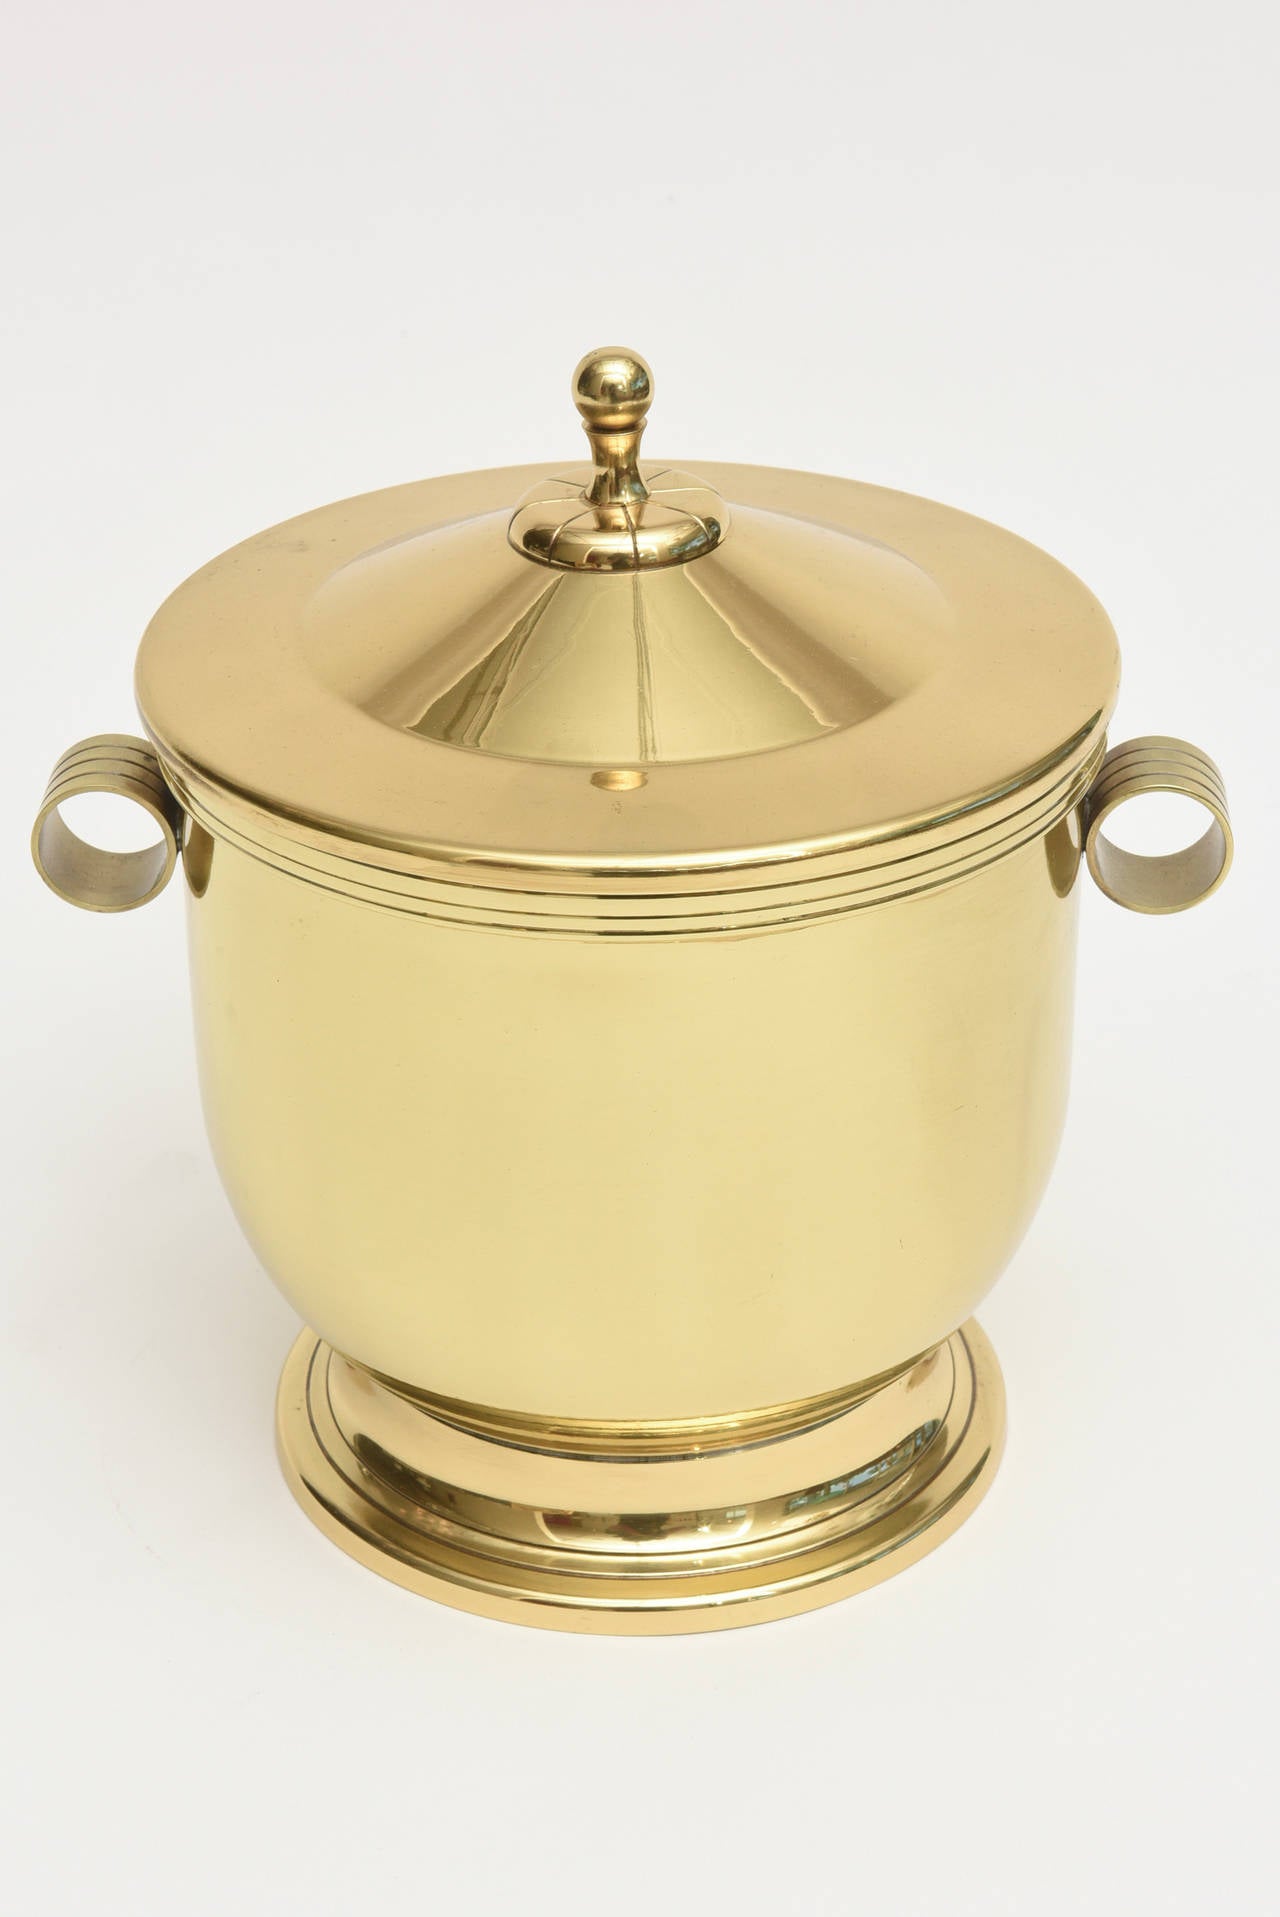 The classical lines and timelessness of this period Mid-Century Modern Tommi Parzinger polished brass and Pyrex glass liner ice bucket is forever.
It will never be dated. It is simple and elegant.
It is not signed on the bottom: The signature was